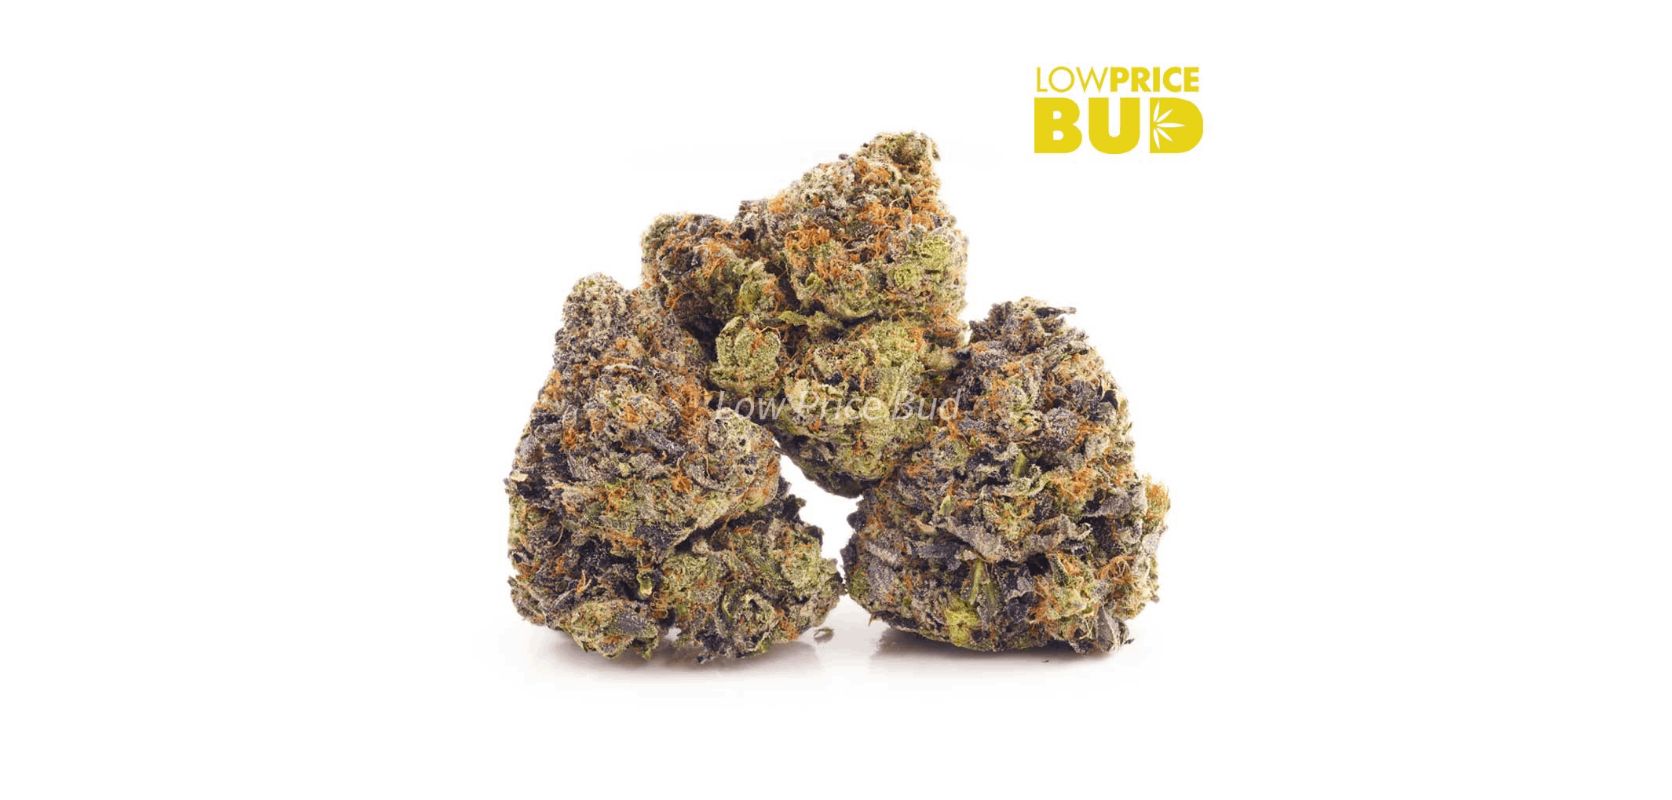 We’re talking terpenes, cannabinoids, effects— all that good stuff. You should definitely try some Bubba Kush (AAAA) if you’re looking to buy weed online.